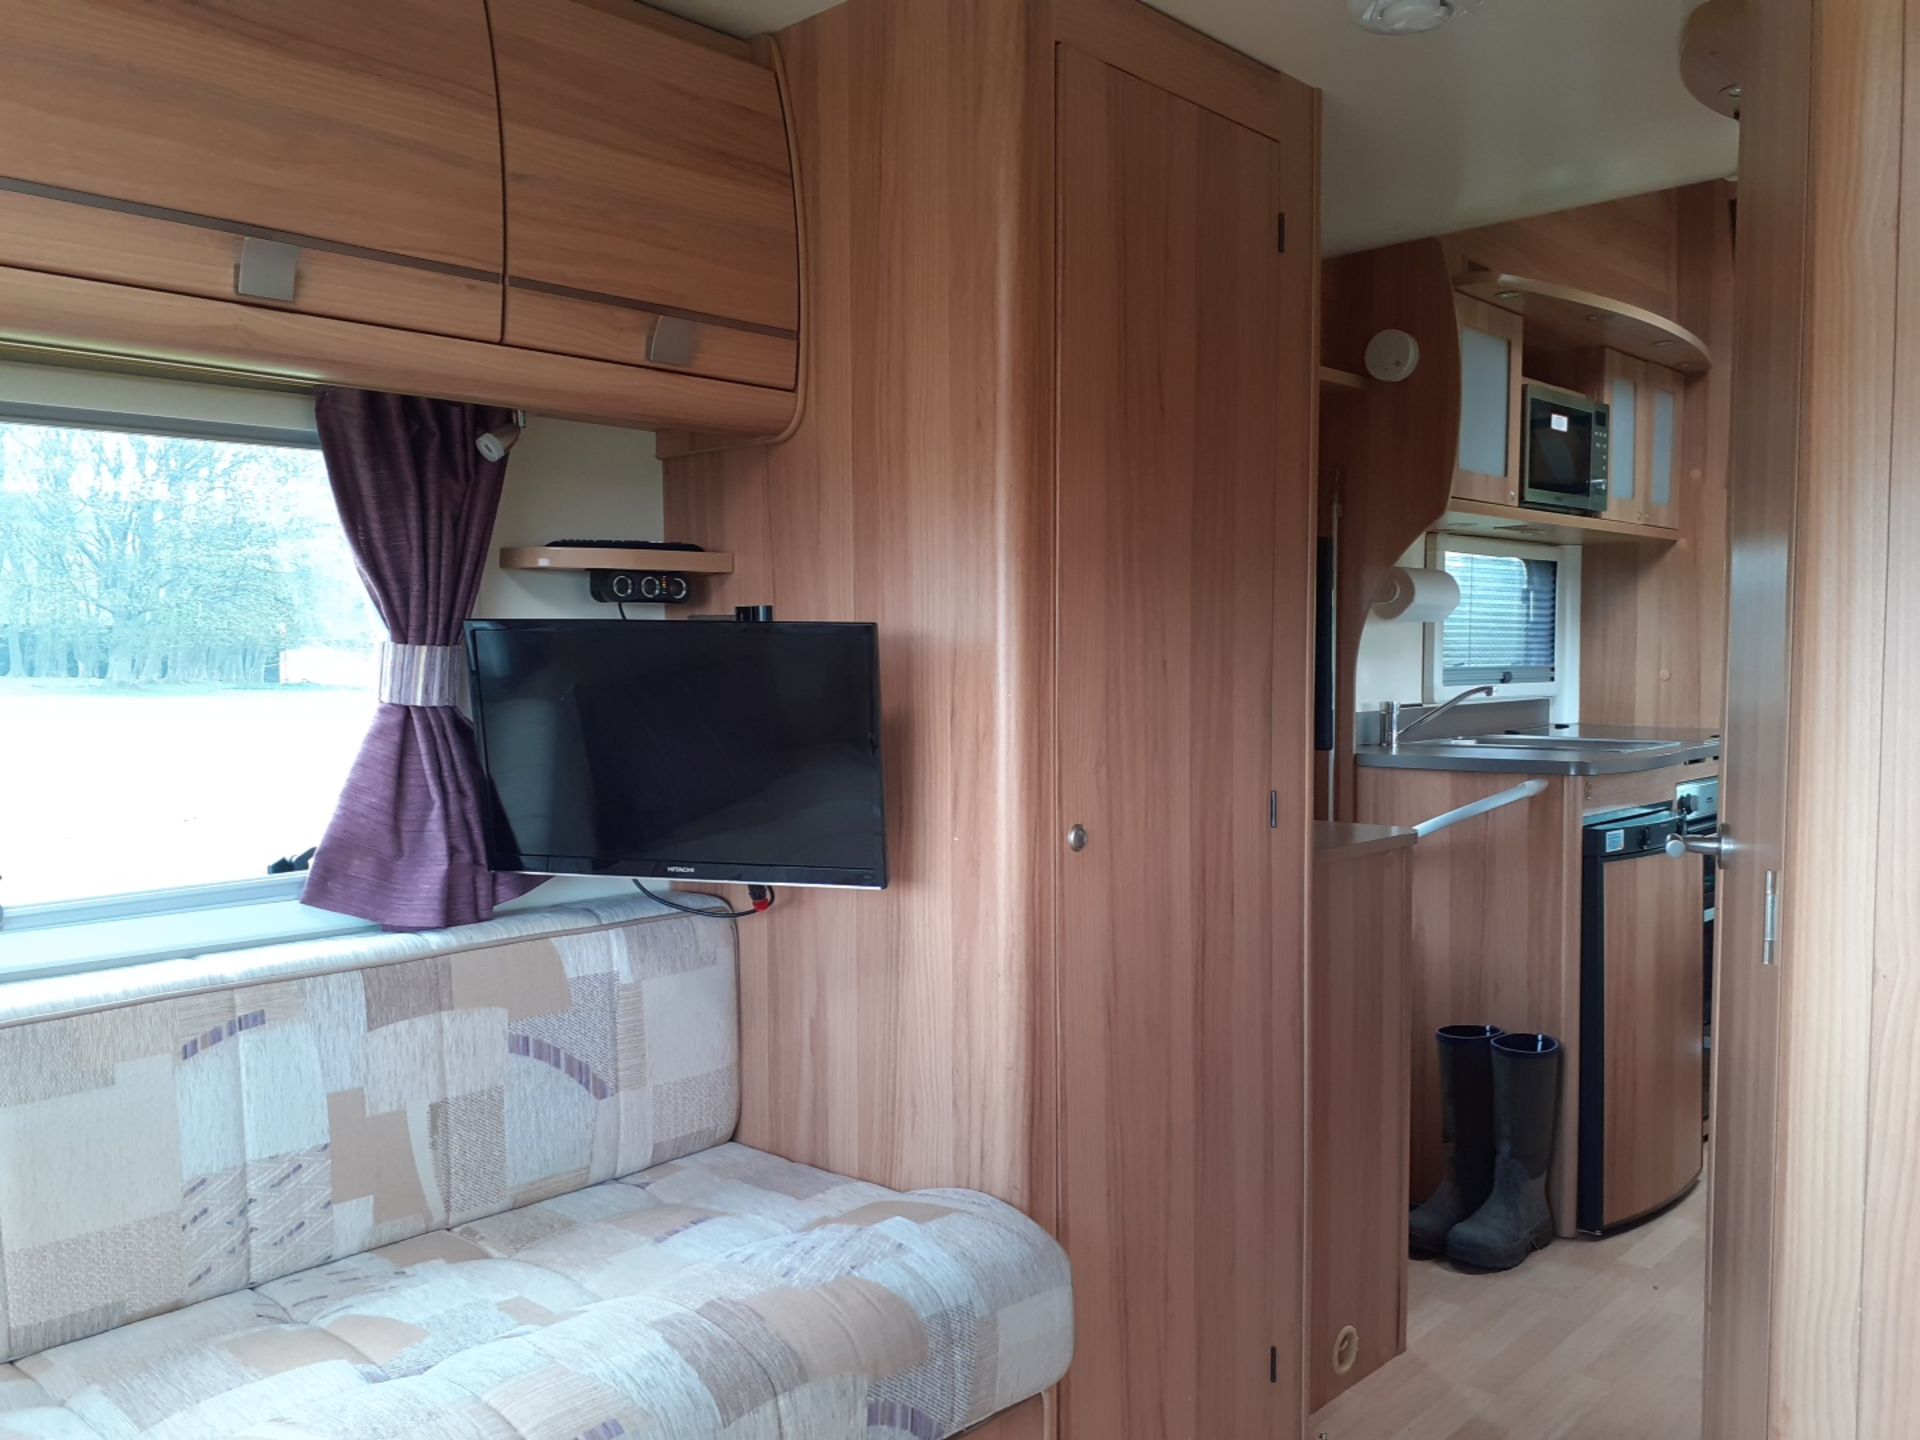 2012 BAILEY APPROACH 760 SE LUXURY 6 BERTH MOTORHOME £10K OF EXTRAS, 30,000 MILES FROM NEW - Image 13 of 31